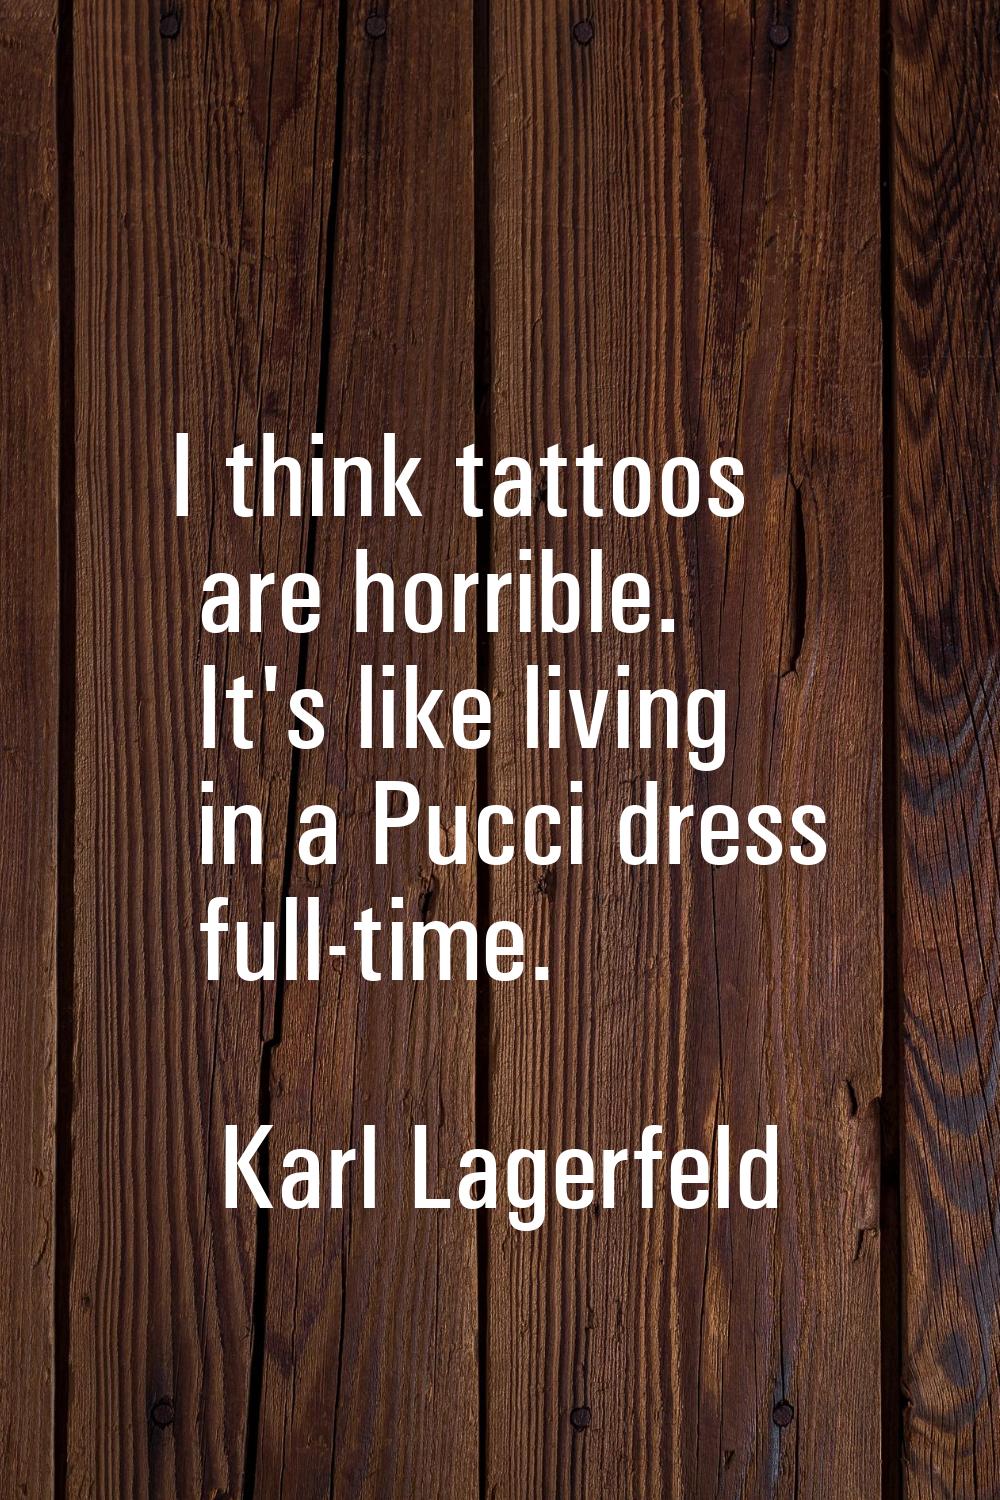 I think tattoos are horrible. It's like living in a Pucci dress full-time.